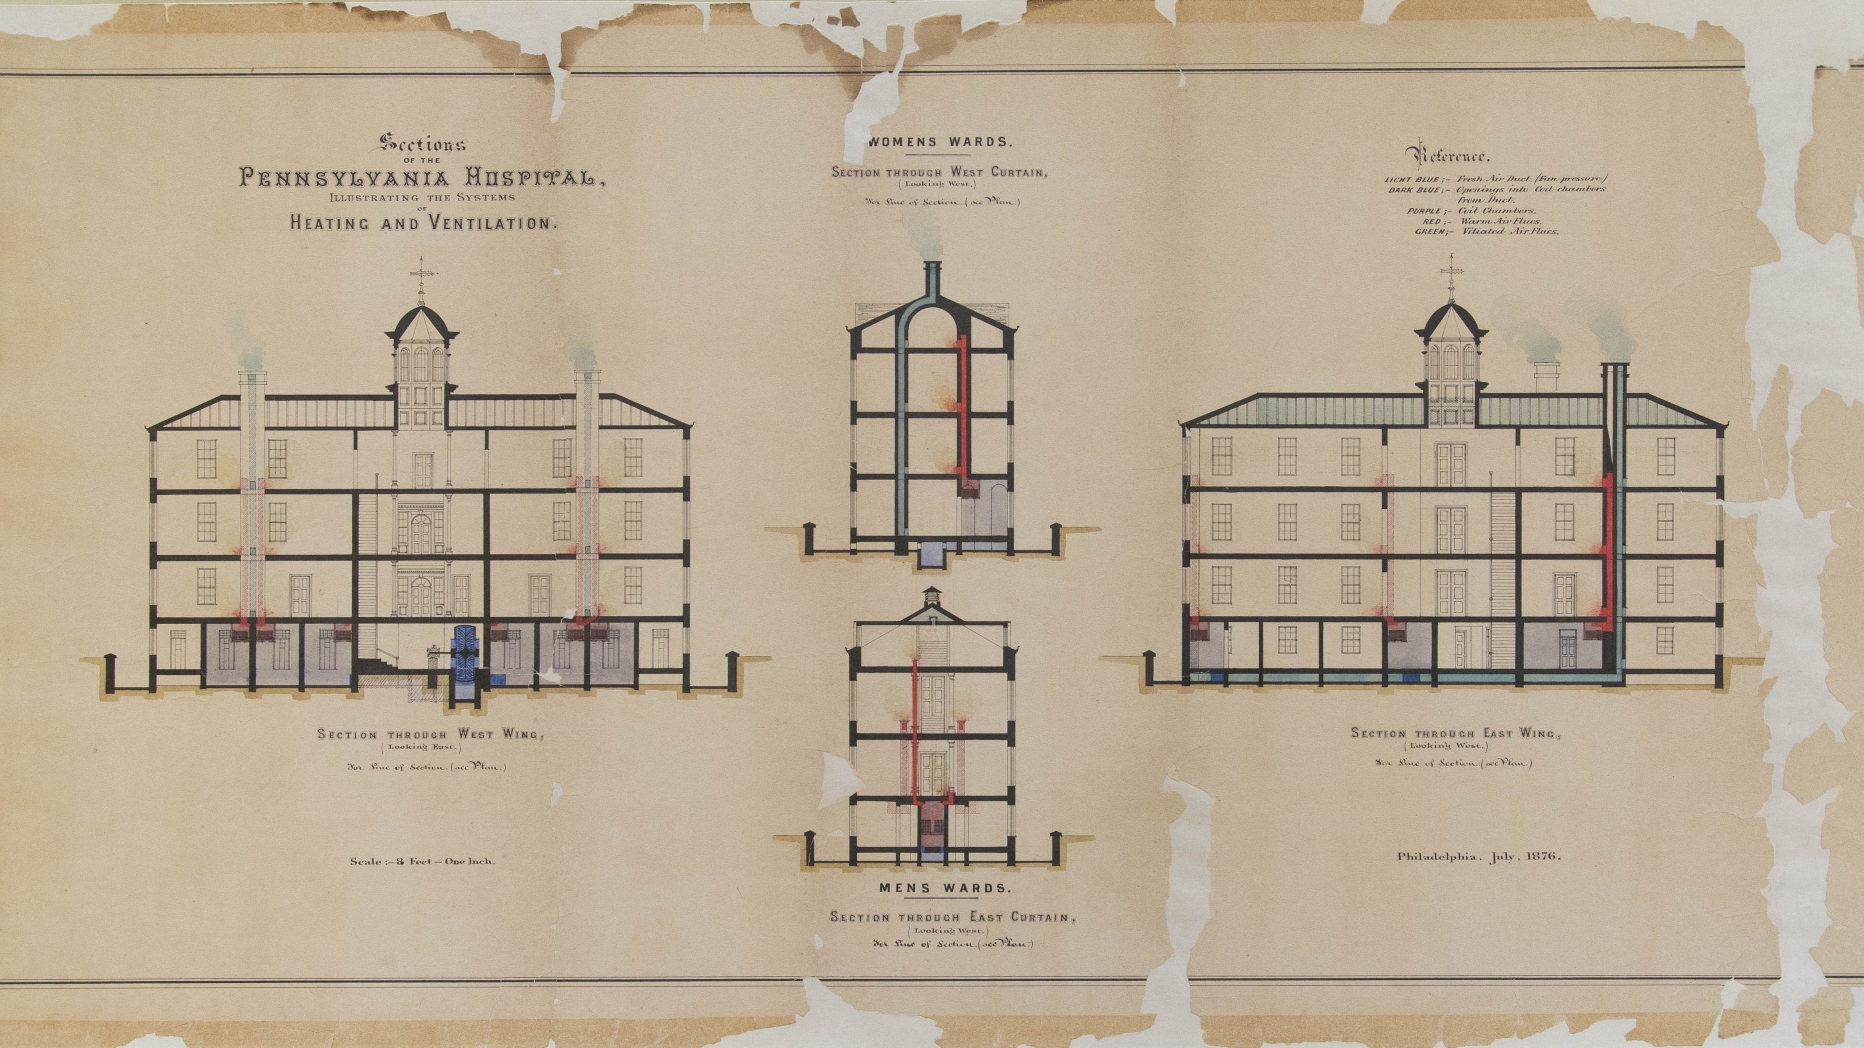 Blueprint of Pennsylvania hospital heat and ventilation system from 1876